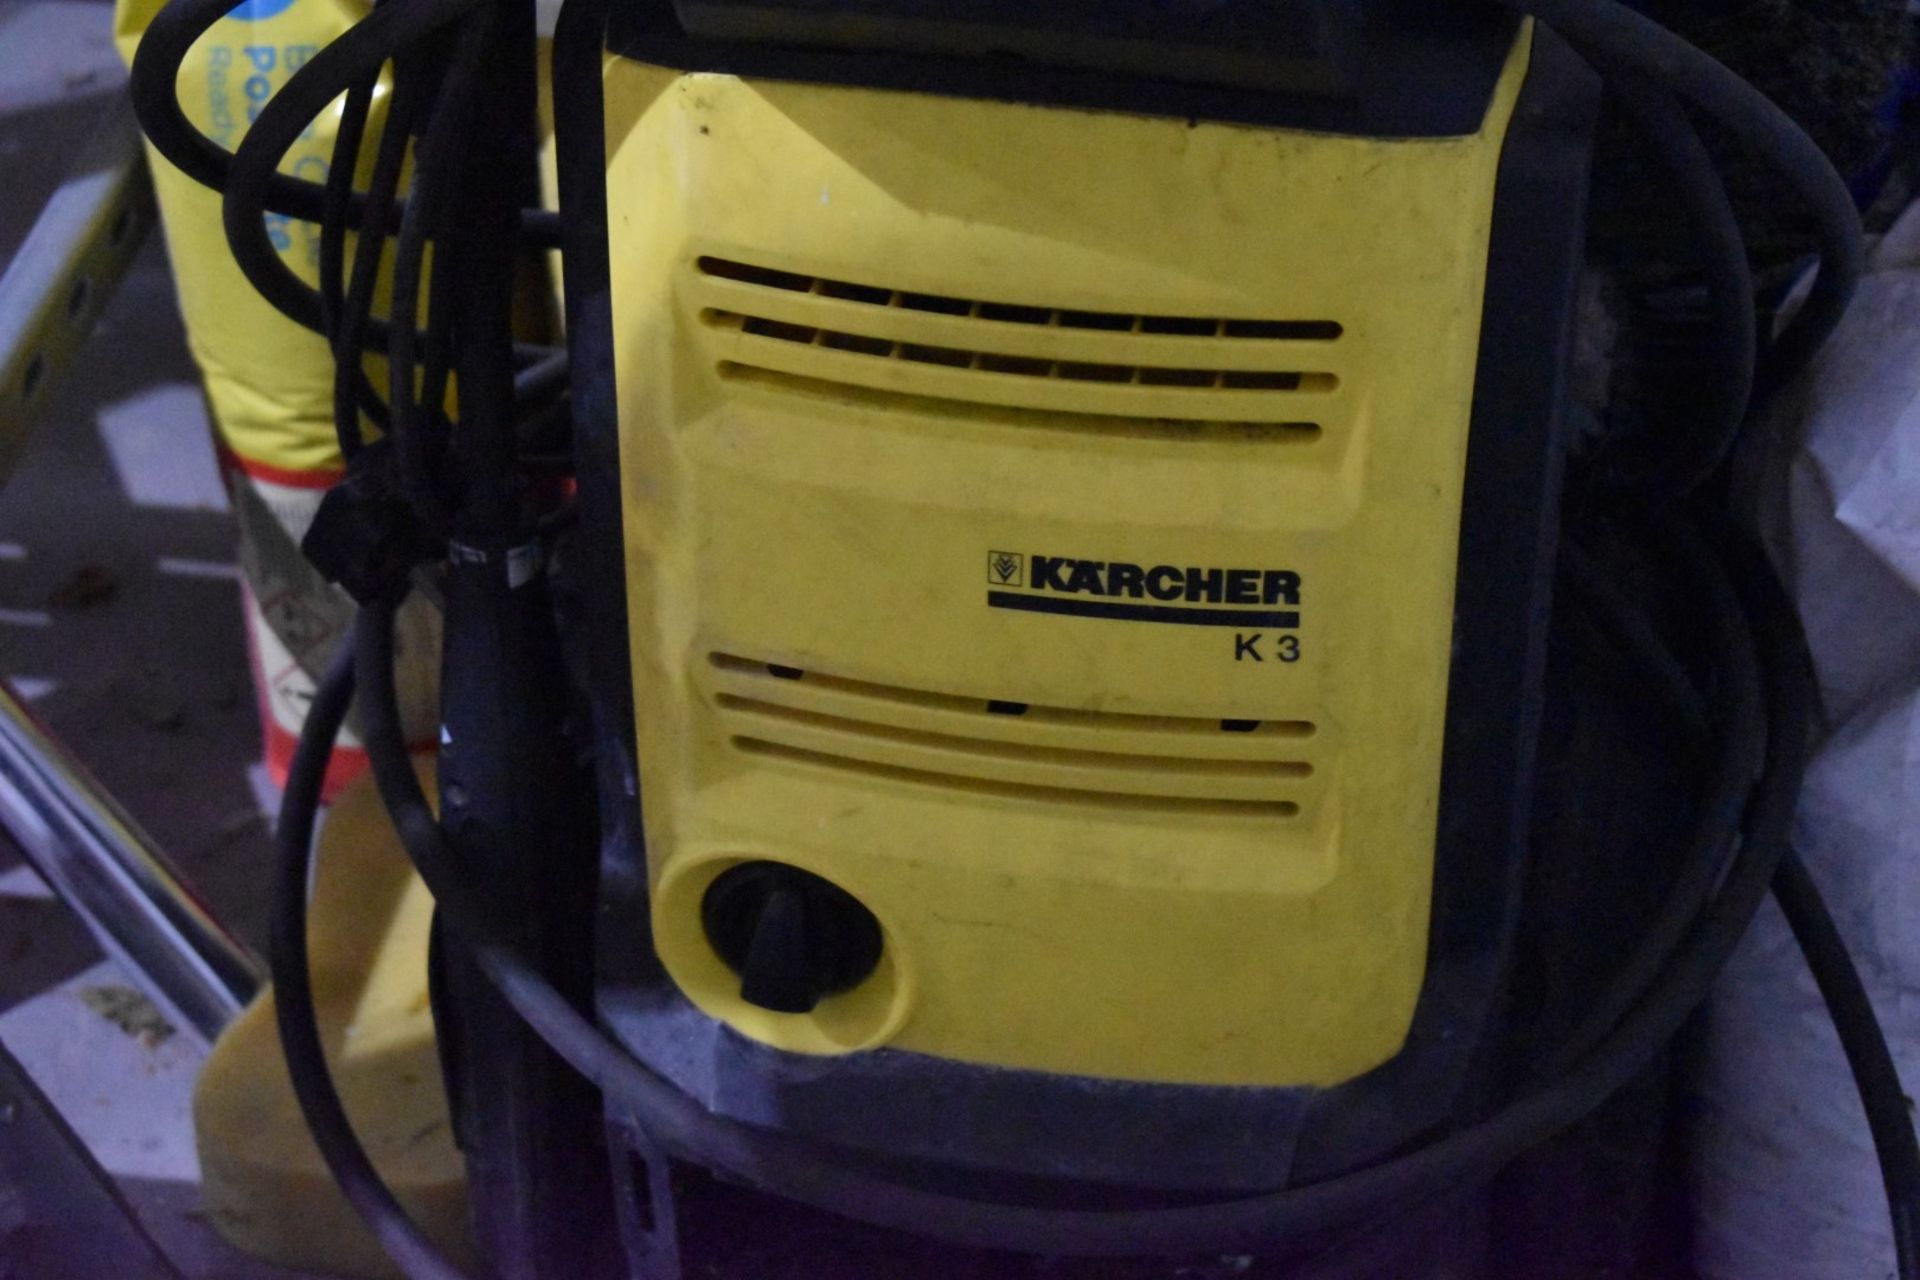 1 x Karcher K3 Pressure Washer With Accessories SRB137 - Image 2 of 6